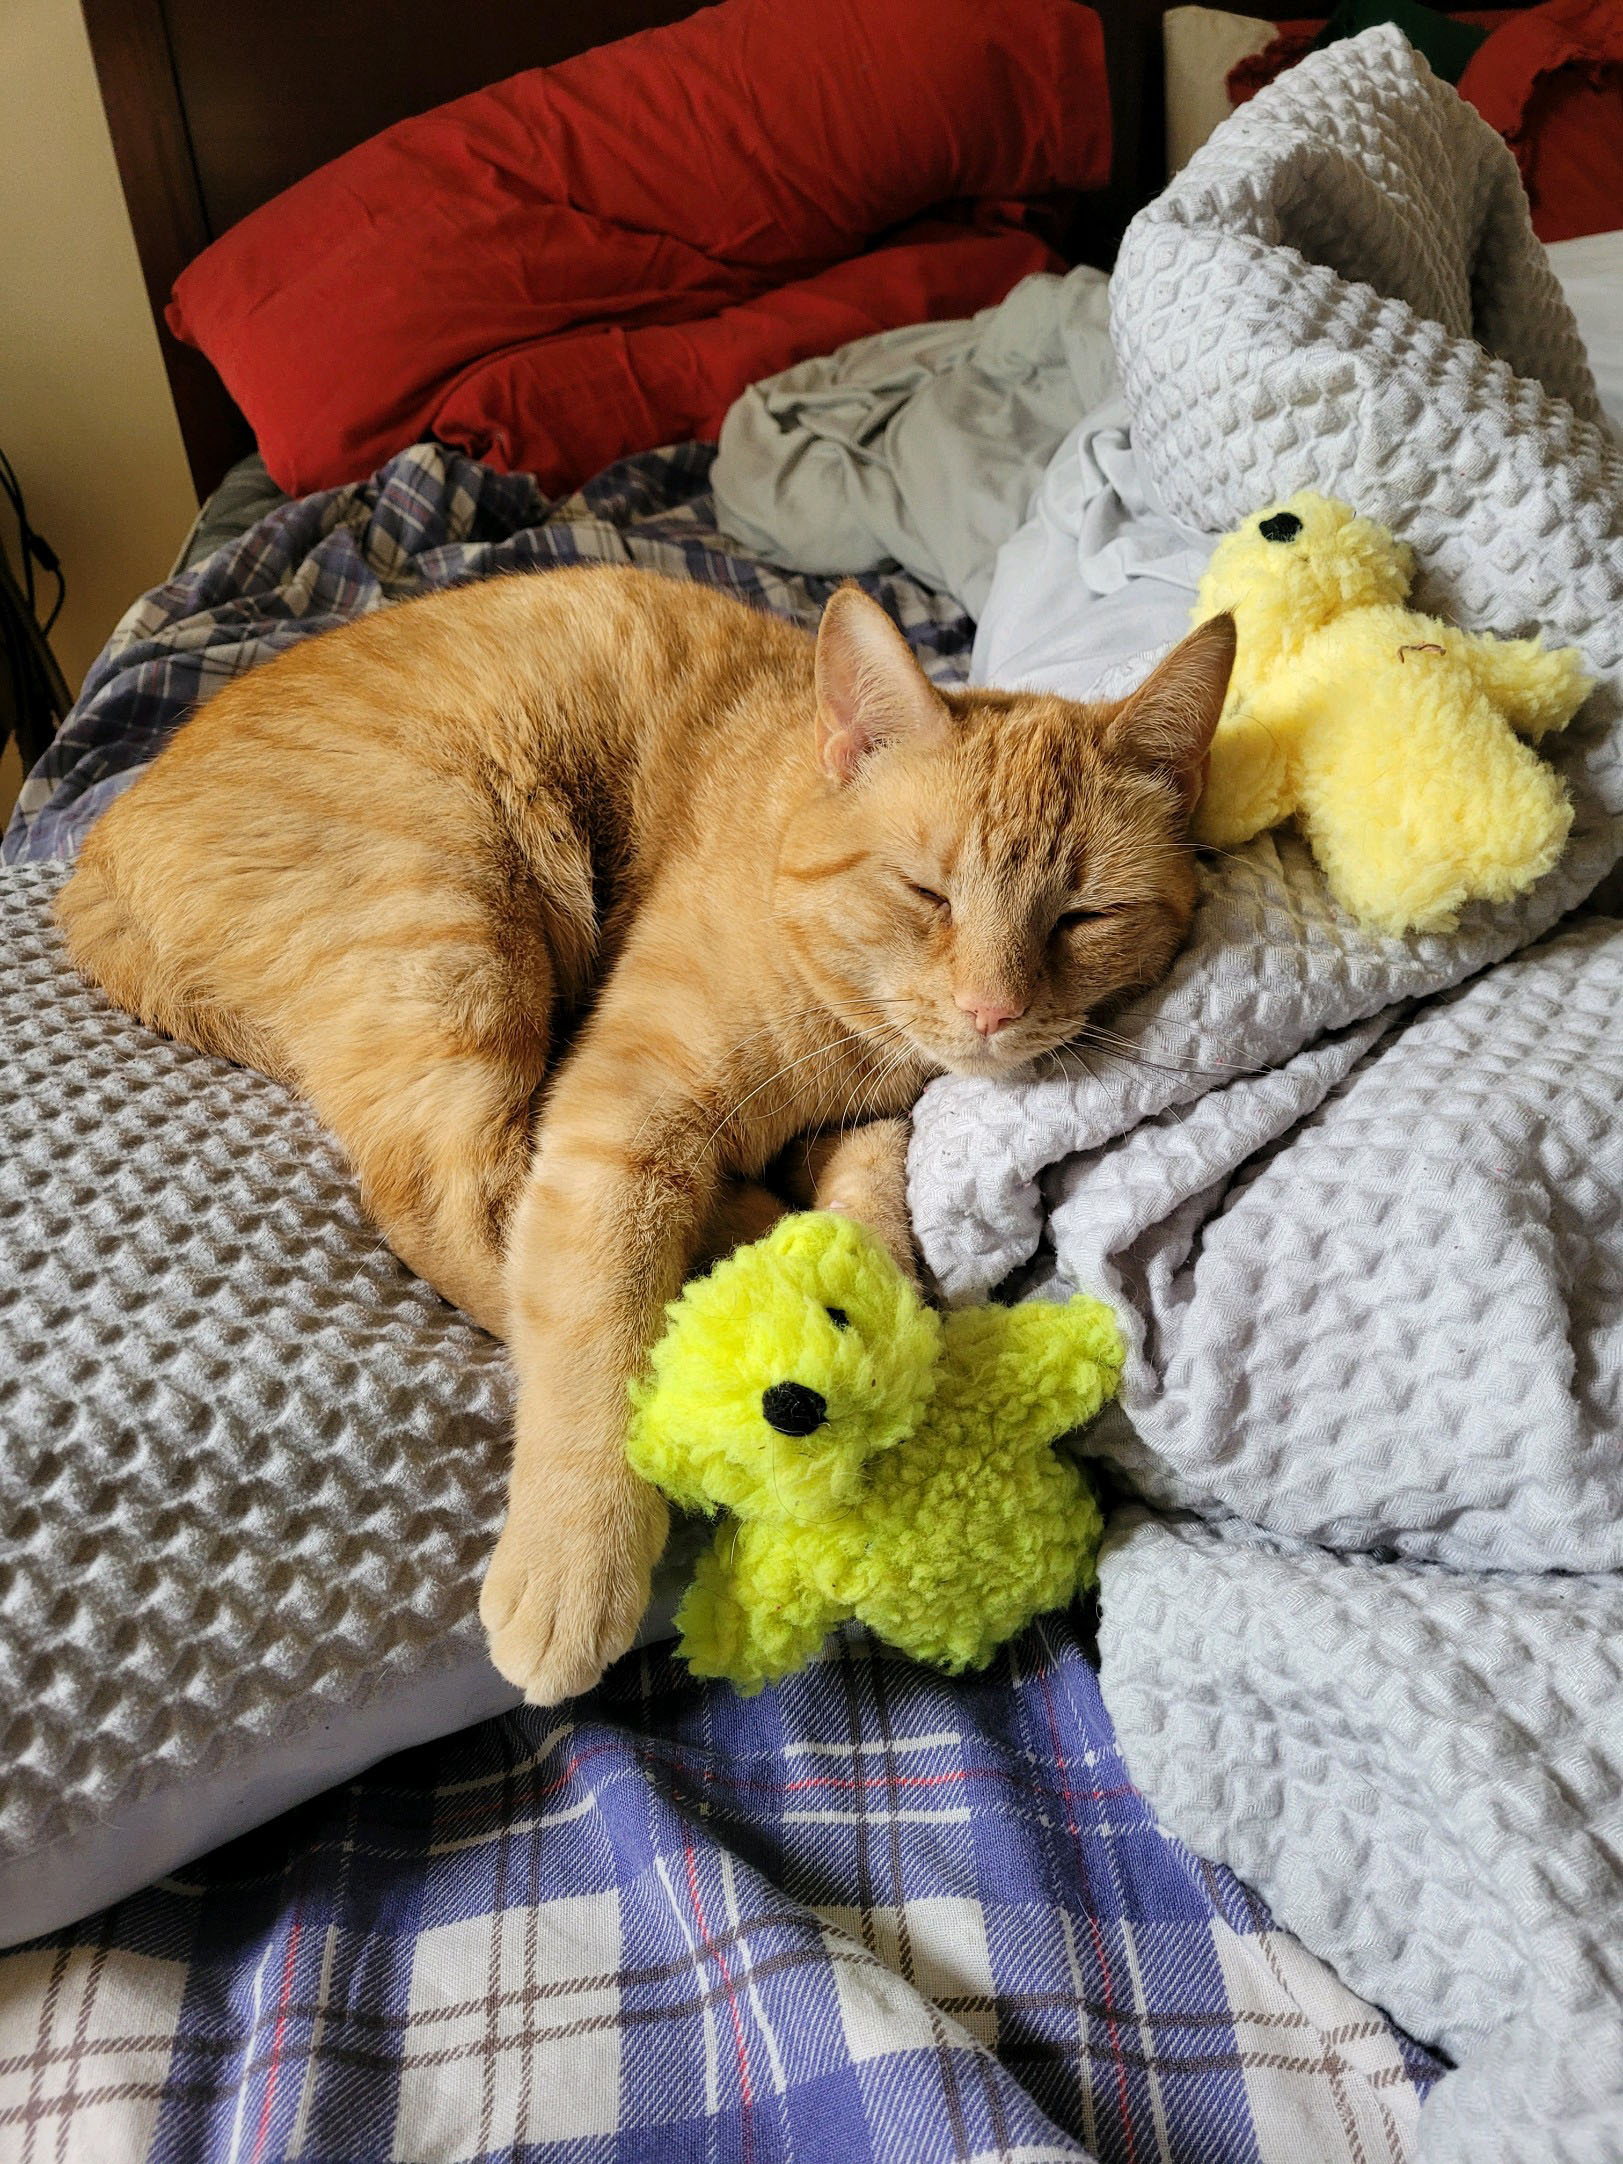 a cat sleeping on a blanket with stuffed animals